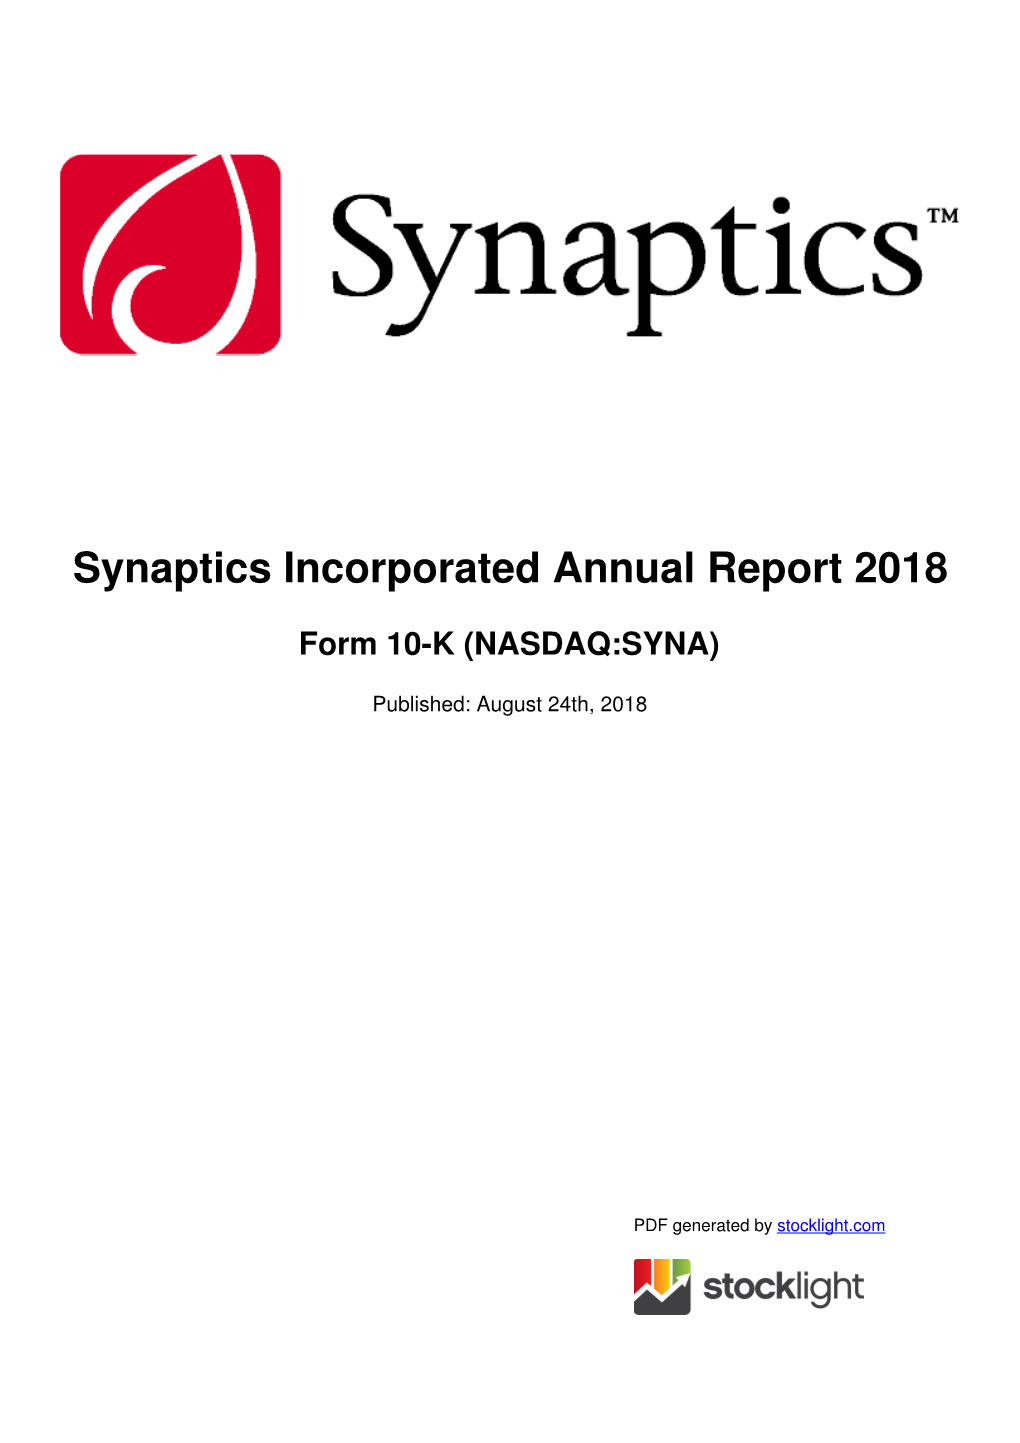 Synaptics Incorporated Annual Report 2018